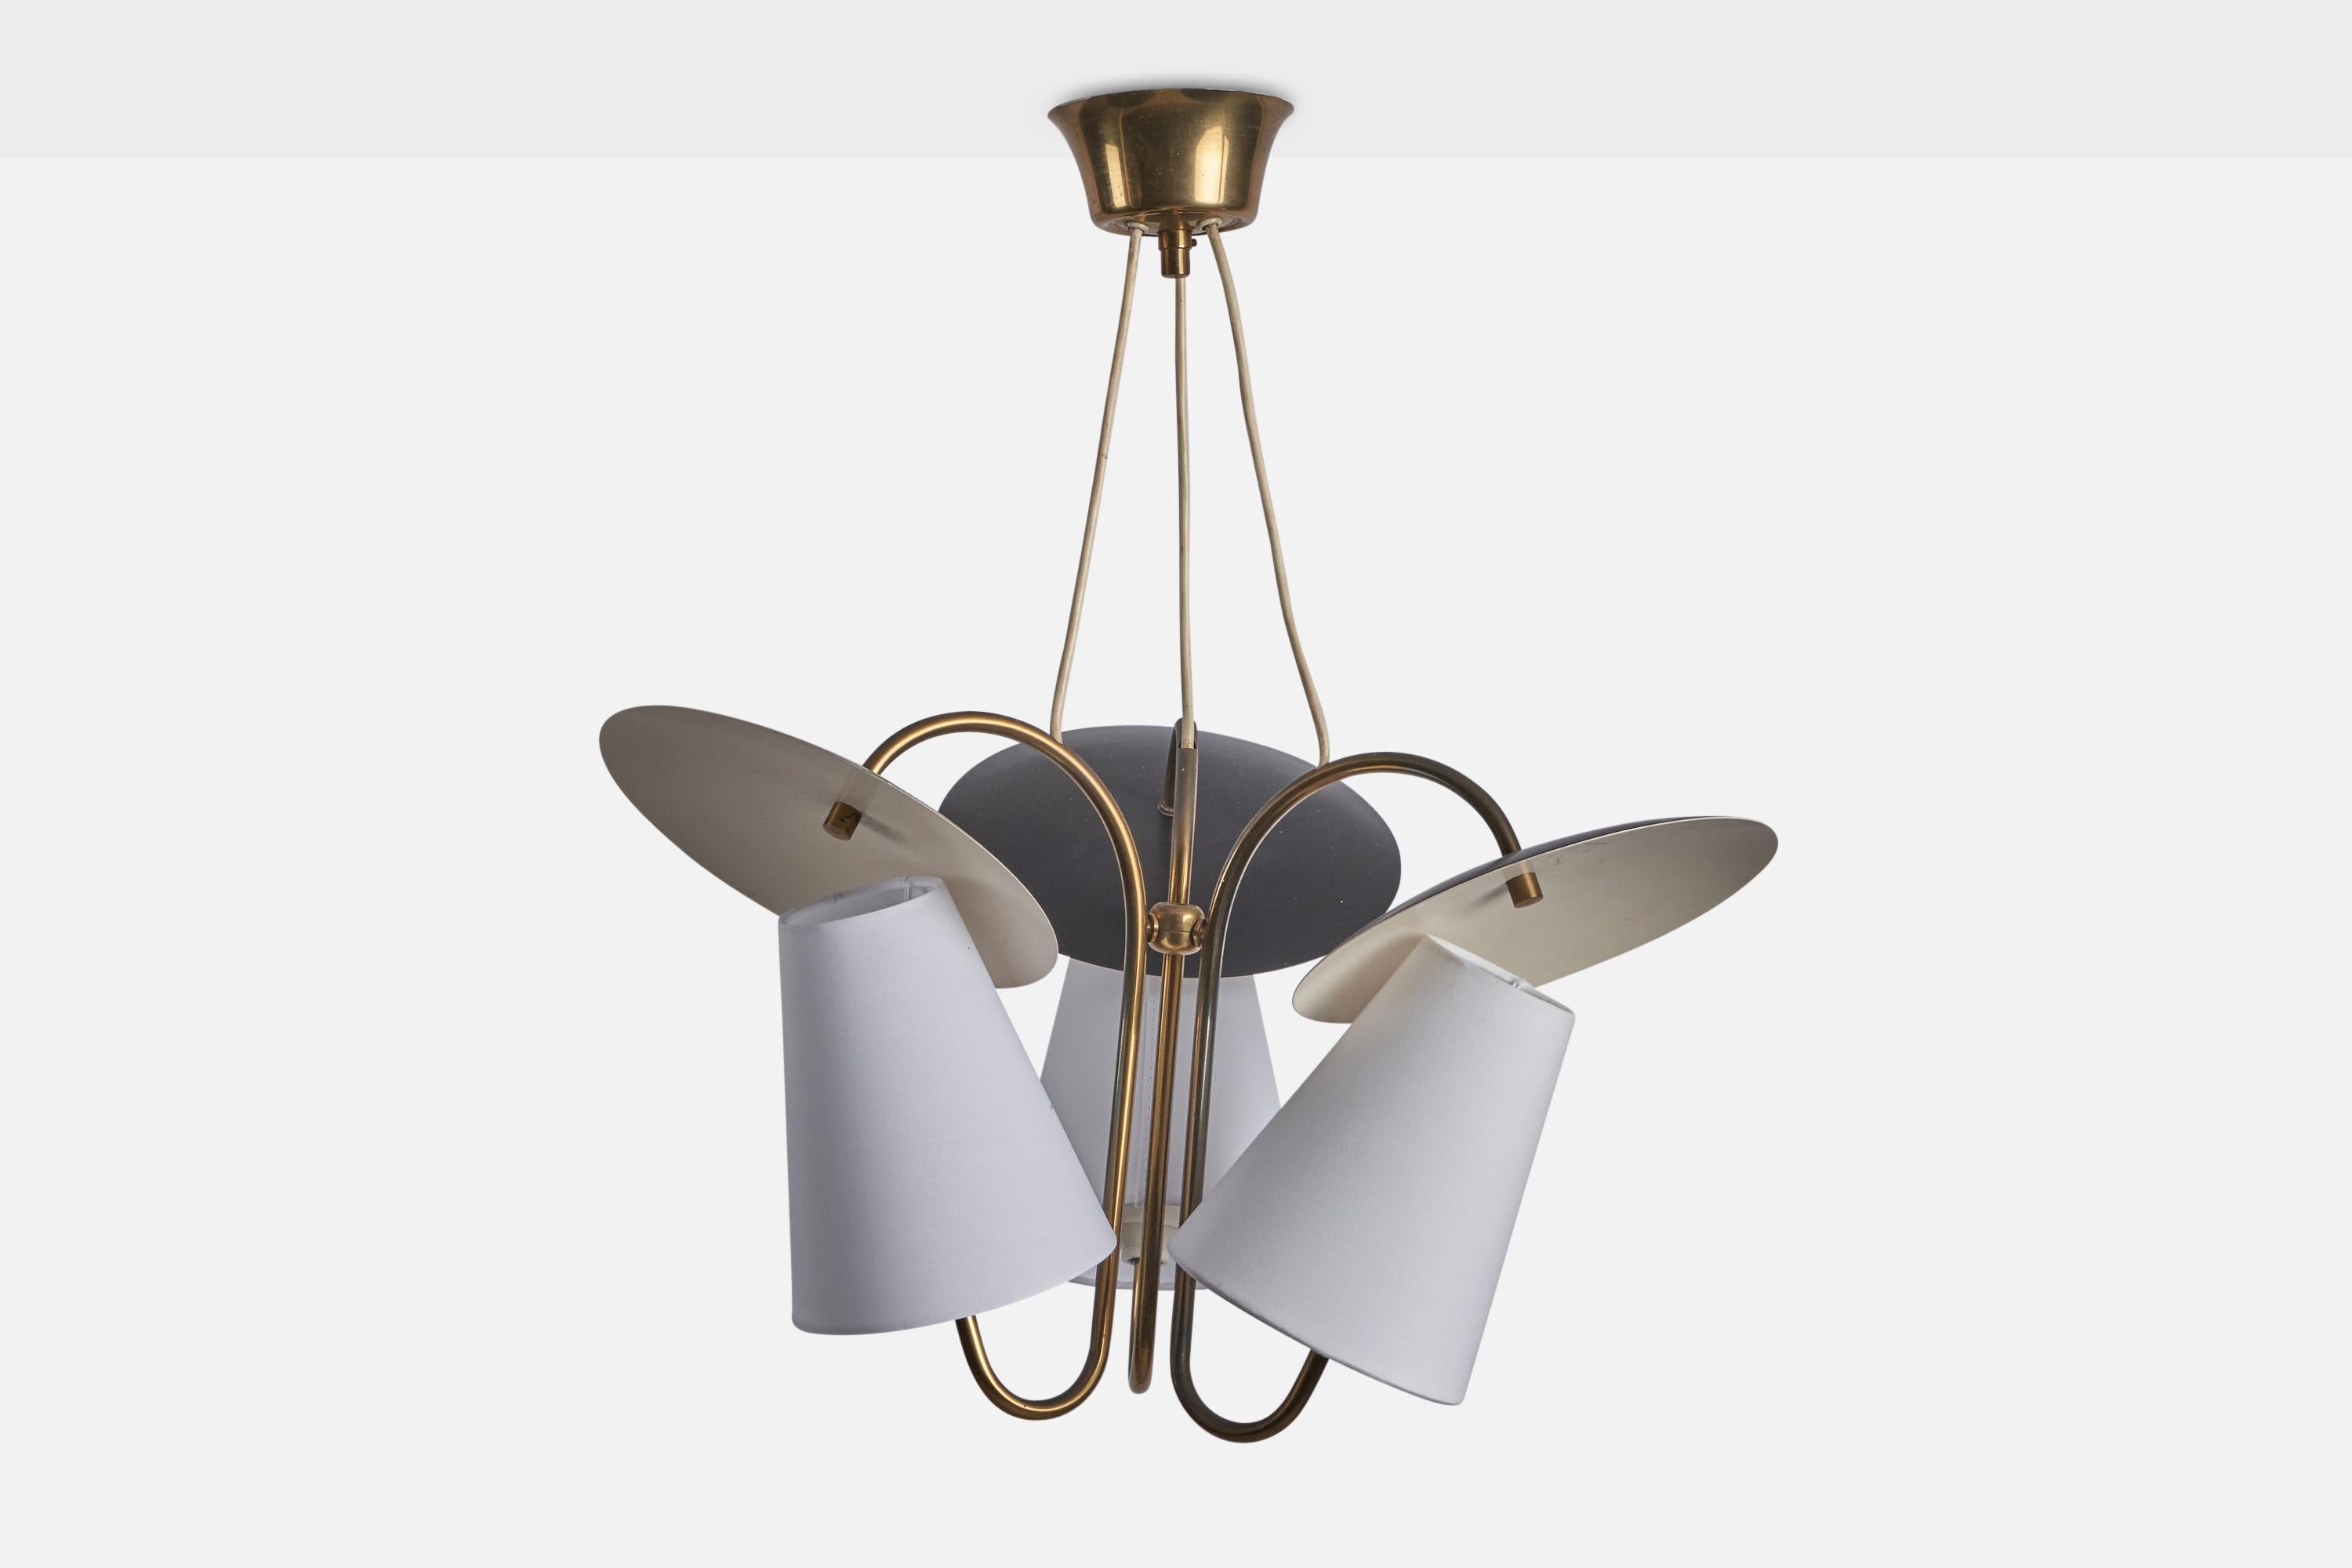 A three-armed brass, black-lacquered metal and white fabric chandelier designed and produced in Denmark, 1950s.

Overall Dimensions (inches): 22” H x 19” Diameter
Bulb Specifications: E-26 Bulb
Number of Sockets: 3